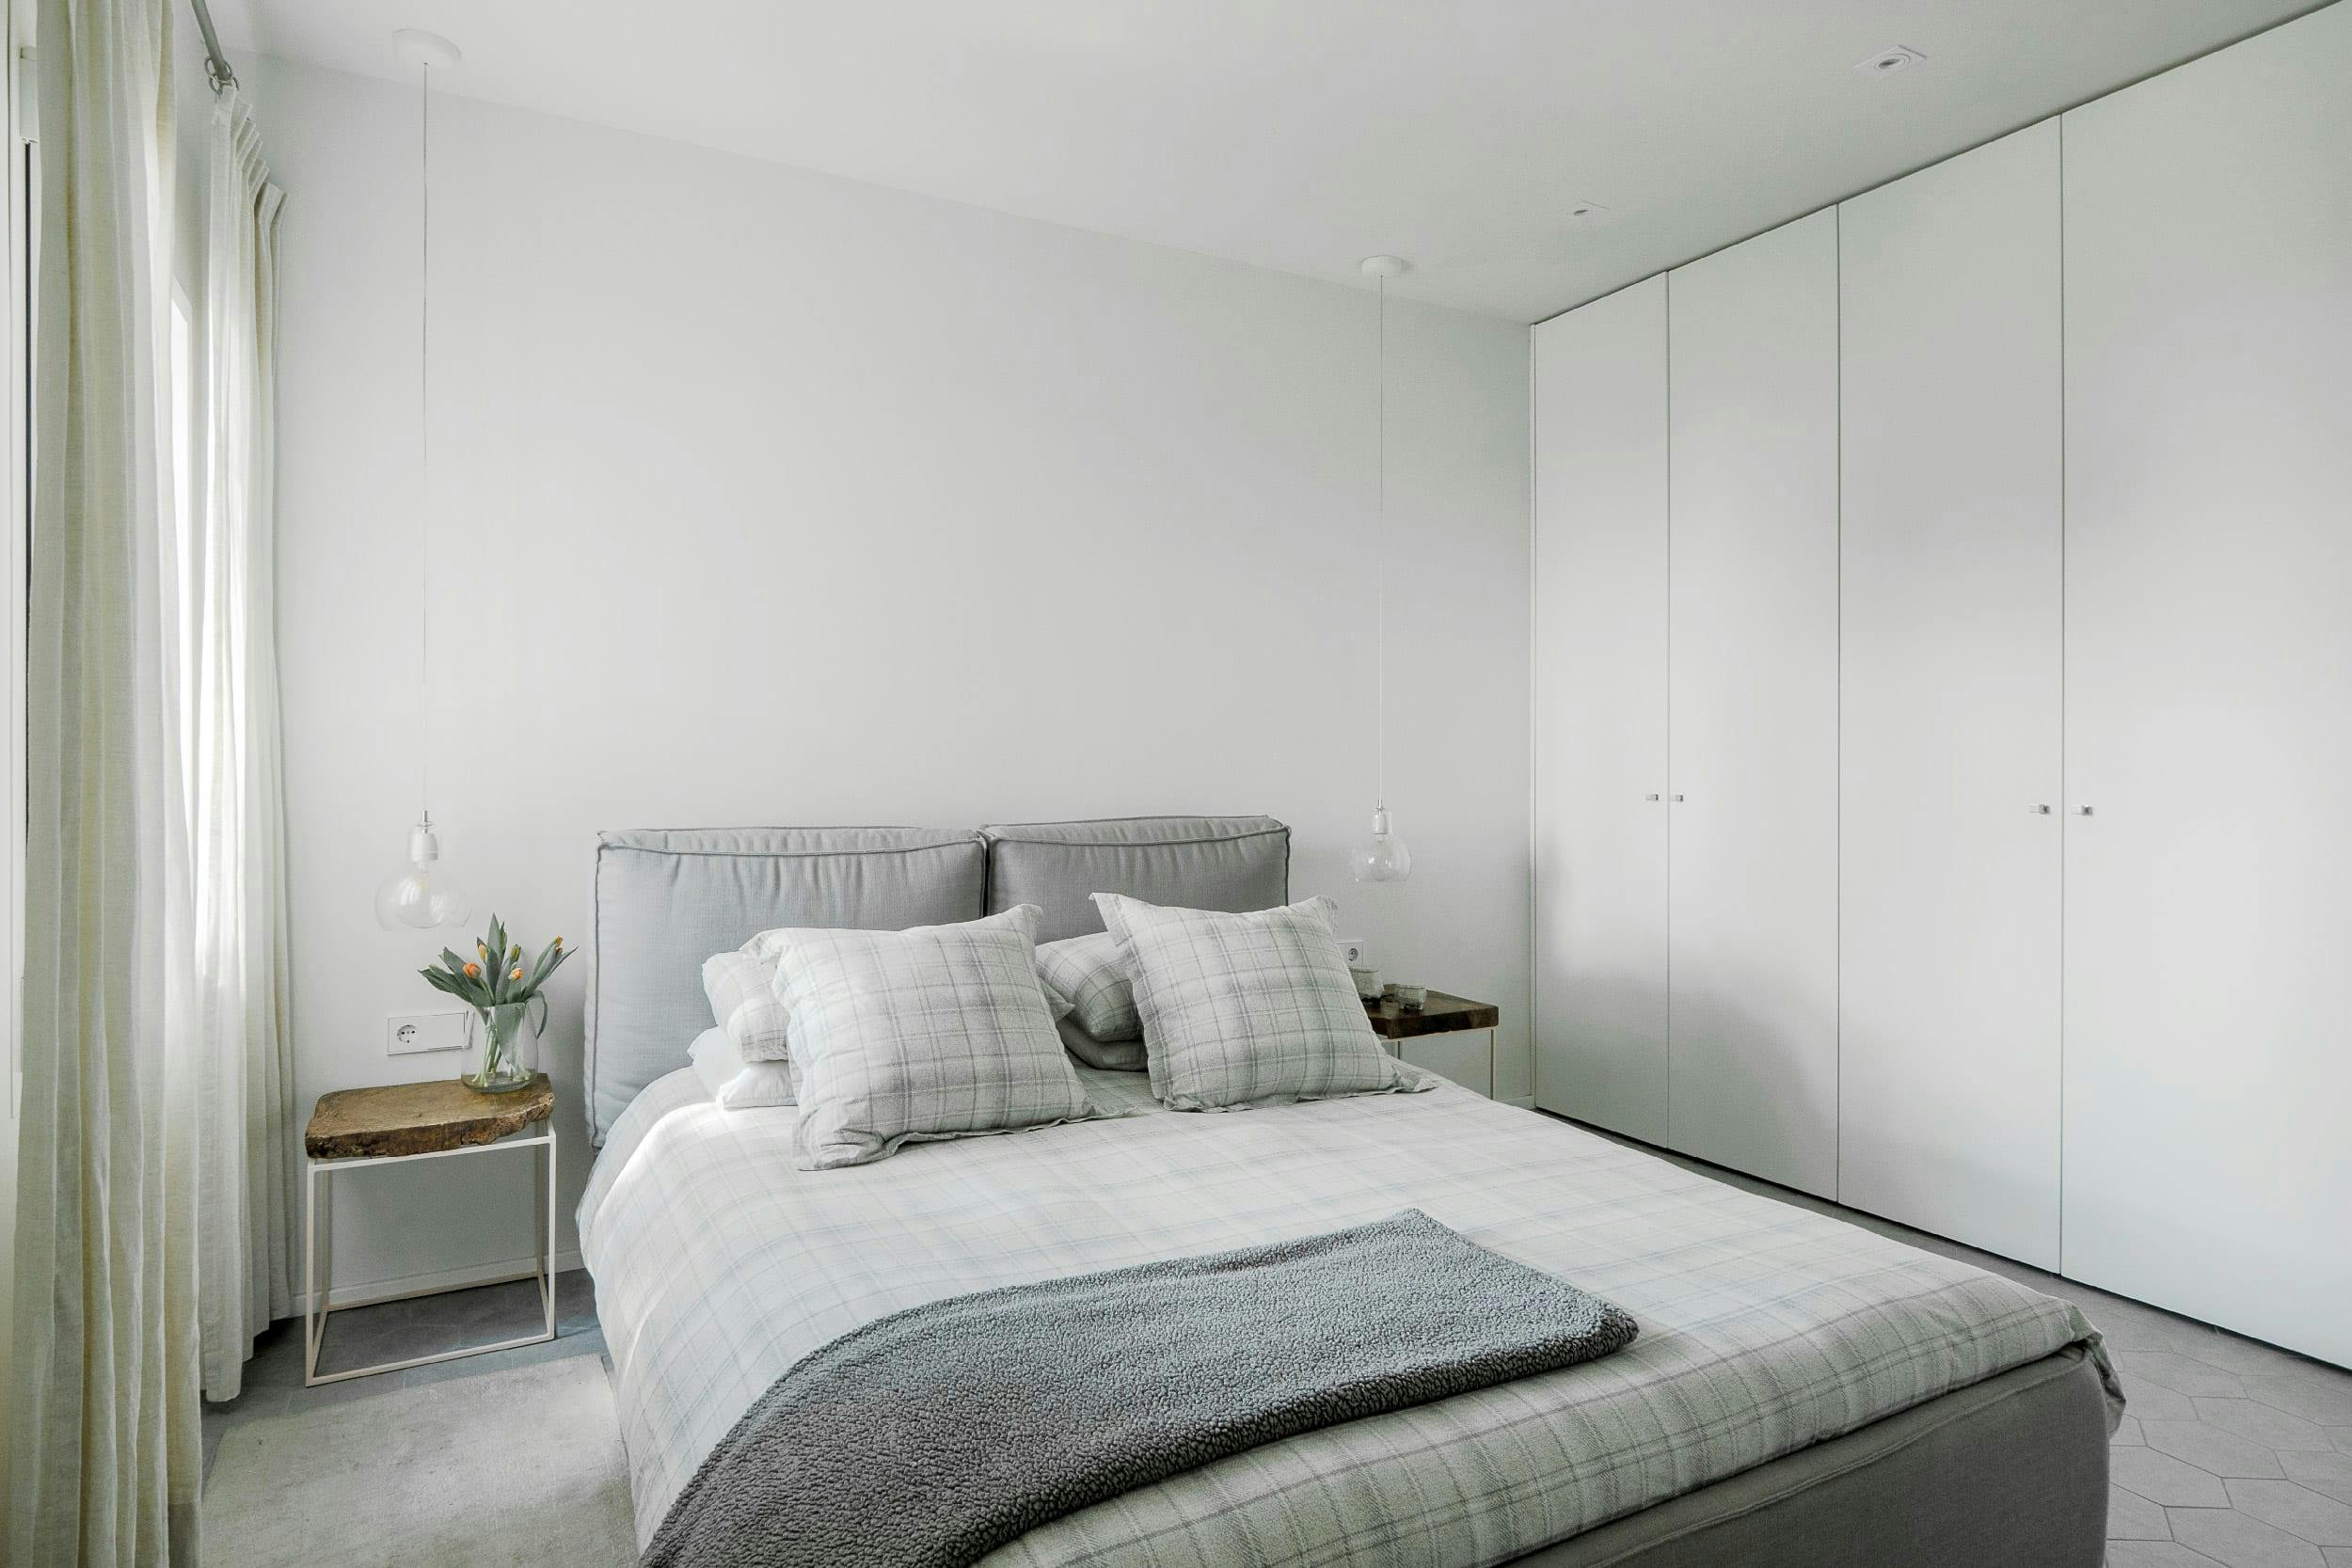 The image features a large bedroom with a neatly made bed, a gray comforter, a white headboard, a white dresser, a white closet, a potted plant, and a vase.